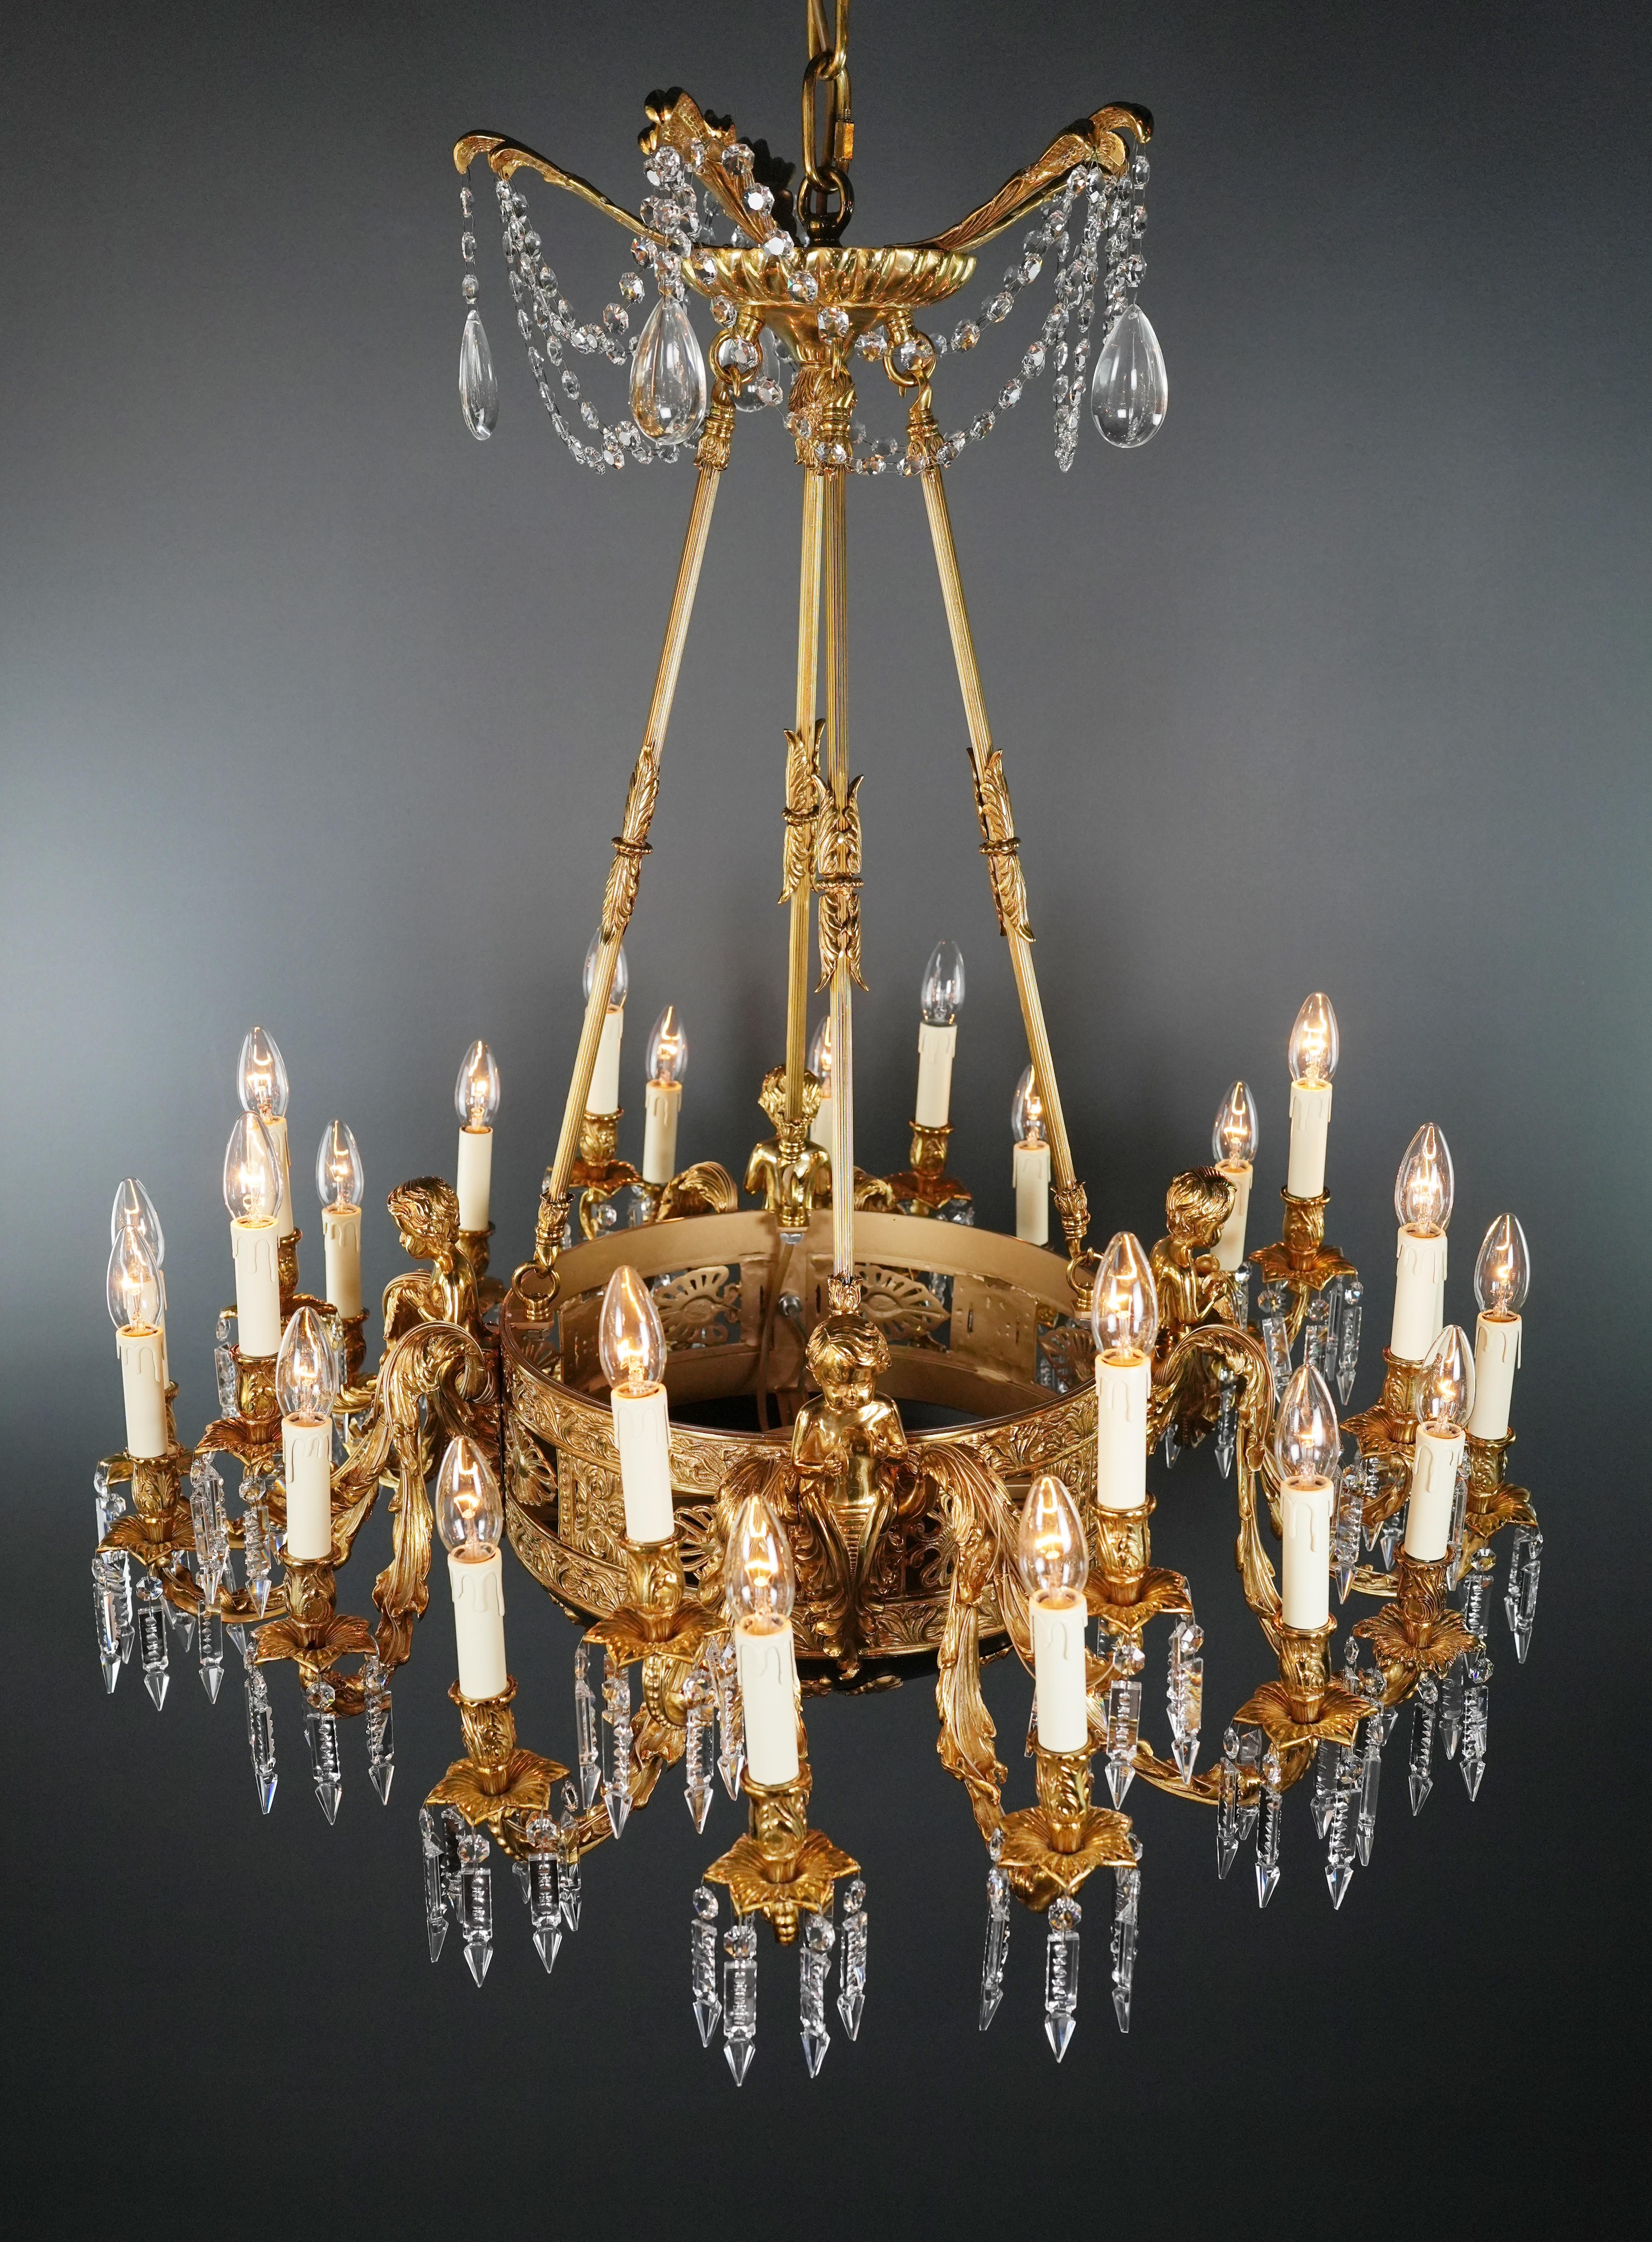 Contemporary Putto Brass Empire Chandelier Lustre Lamp Antique Gold For Sale